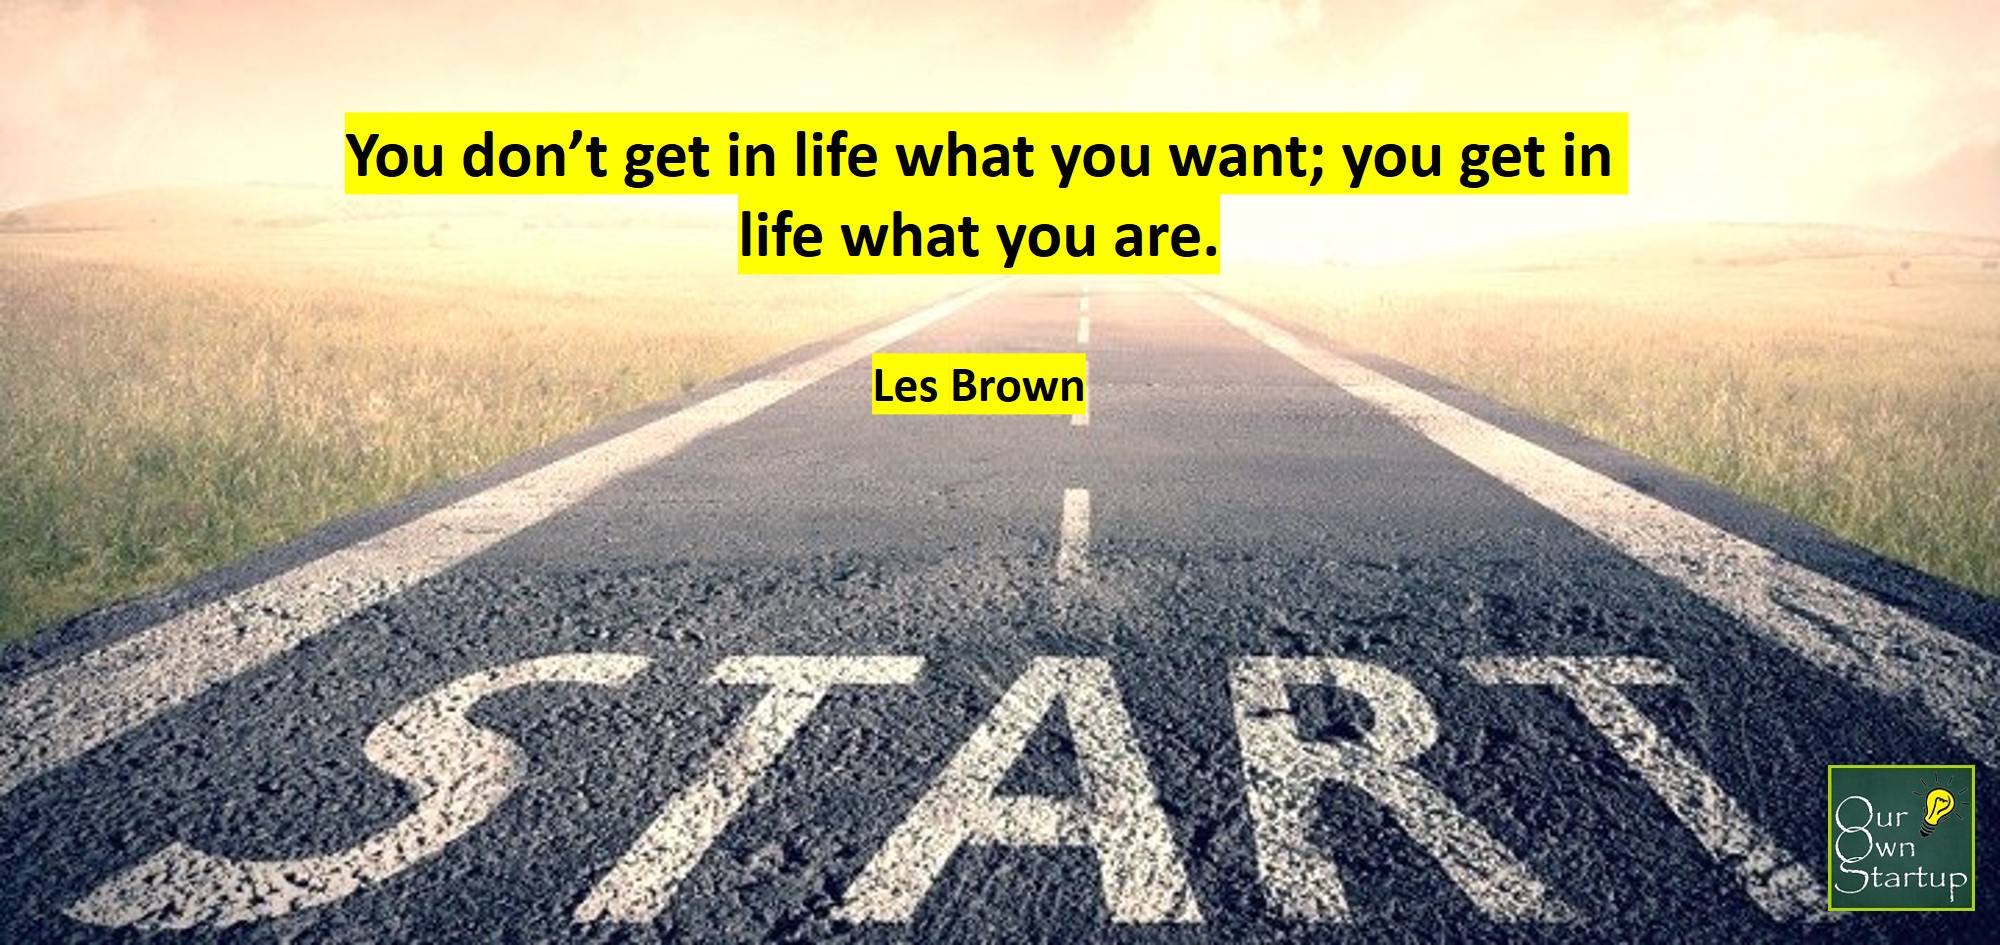 Les Brown - You don't get what you want in life. You get